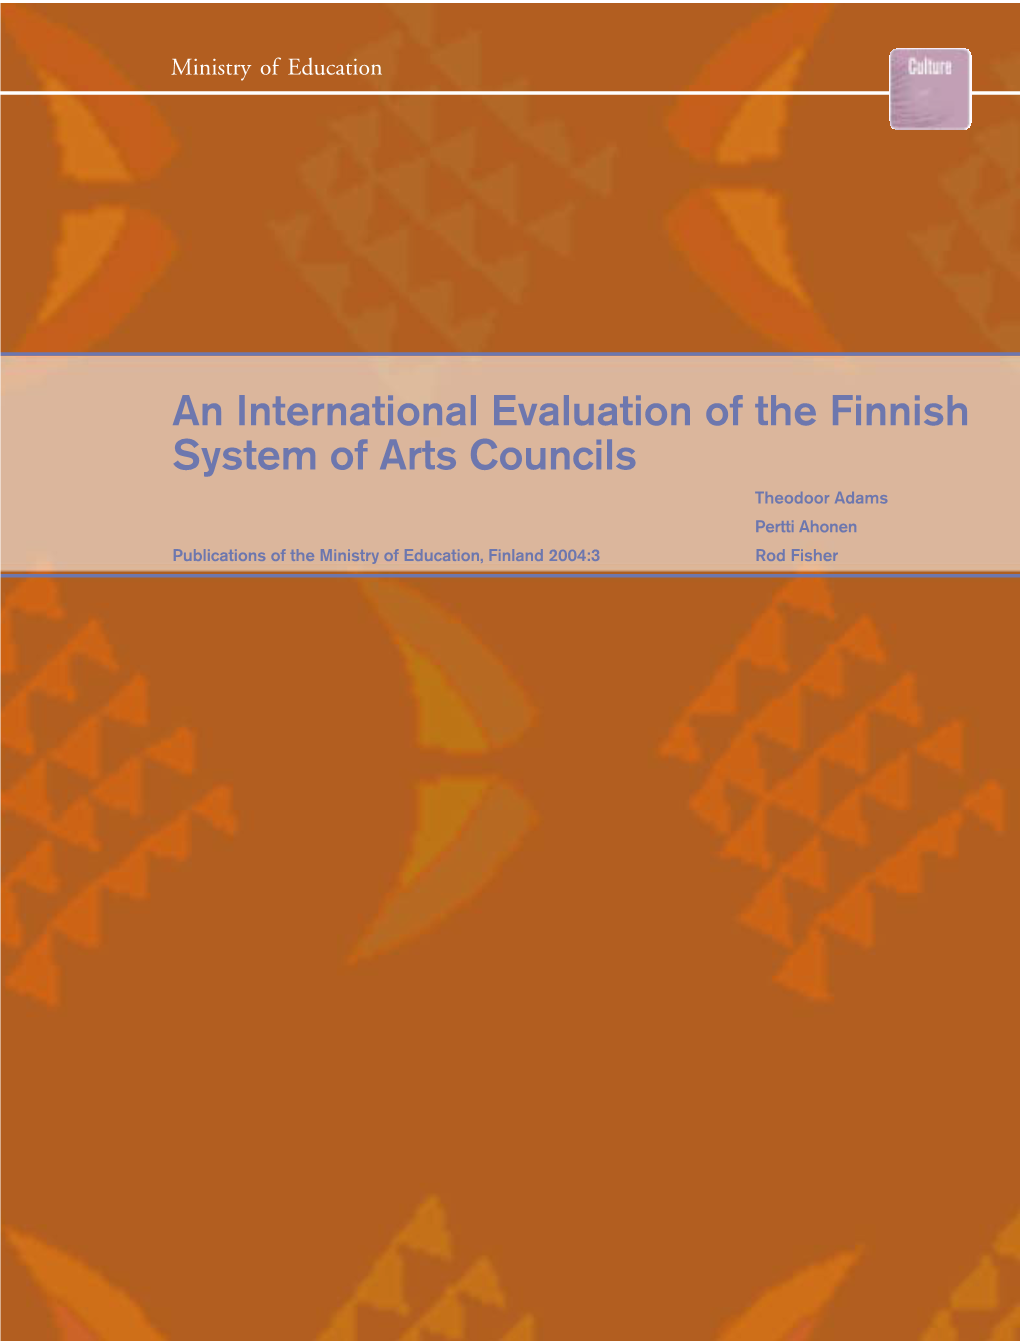 An International Evaluation of the Finnish System of Arts Councils